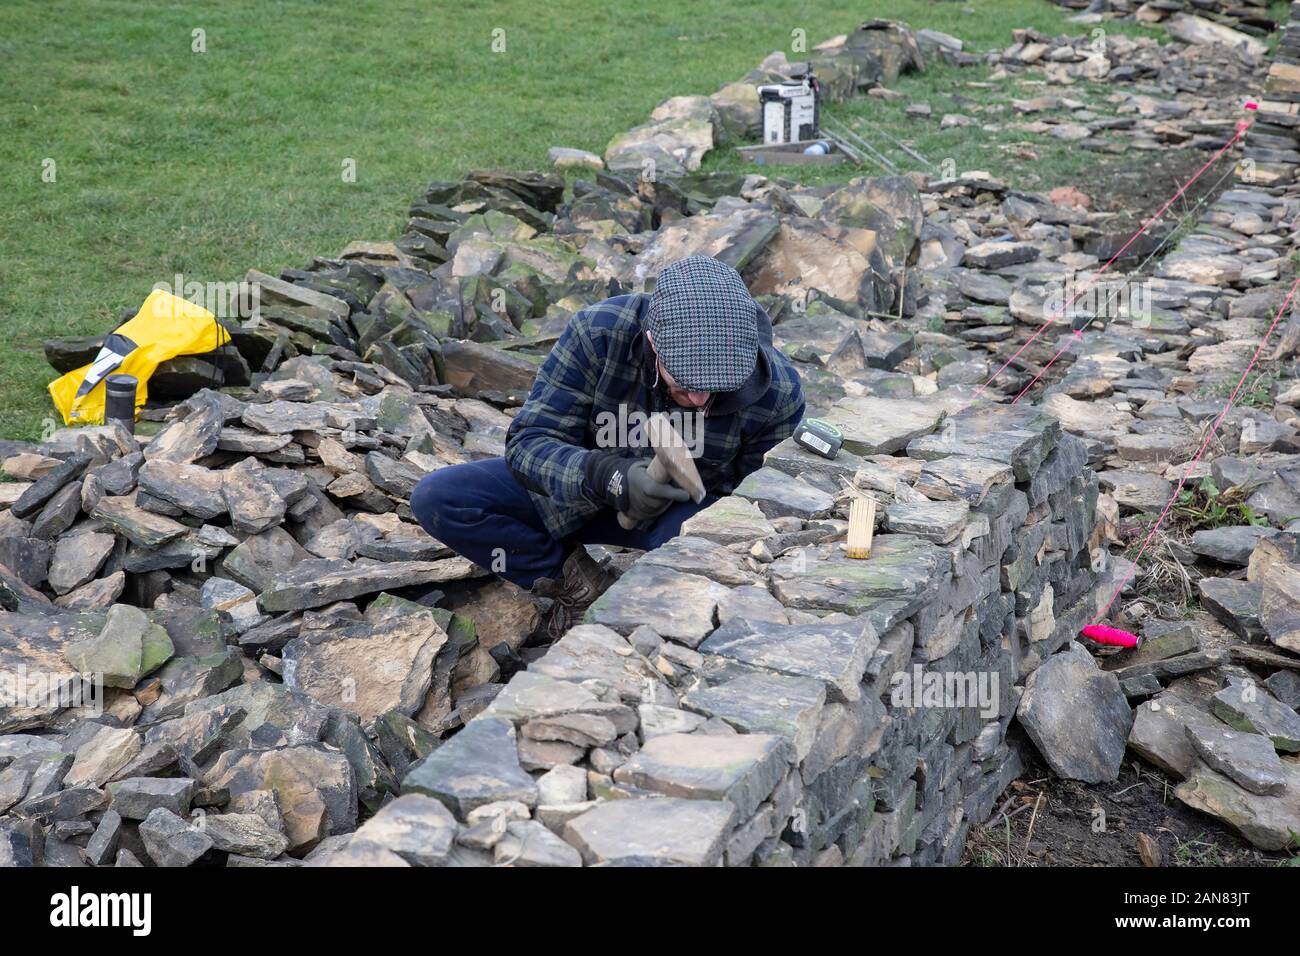 A dry stone wall craftsman restoring a dilapidated wall to its former glory on the boundary of a sports field in West Yorkshire, England U.K. Stock Photo